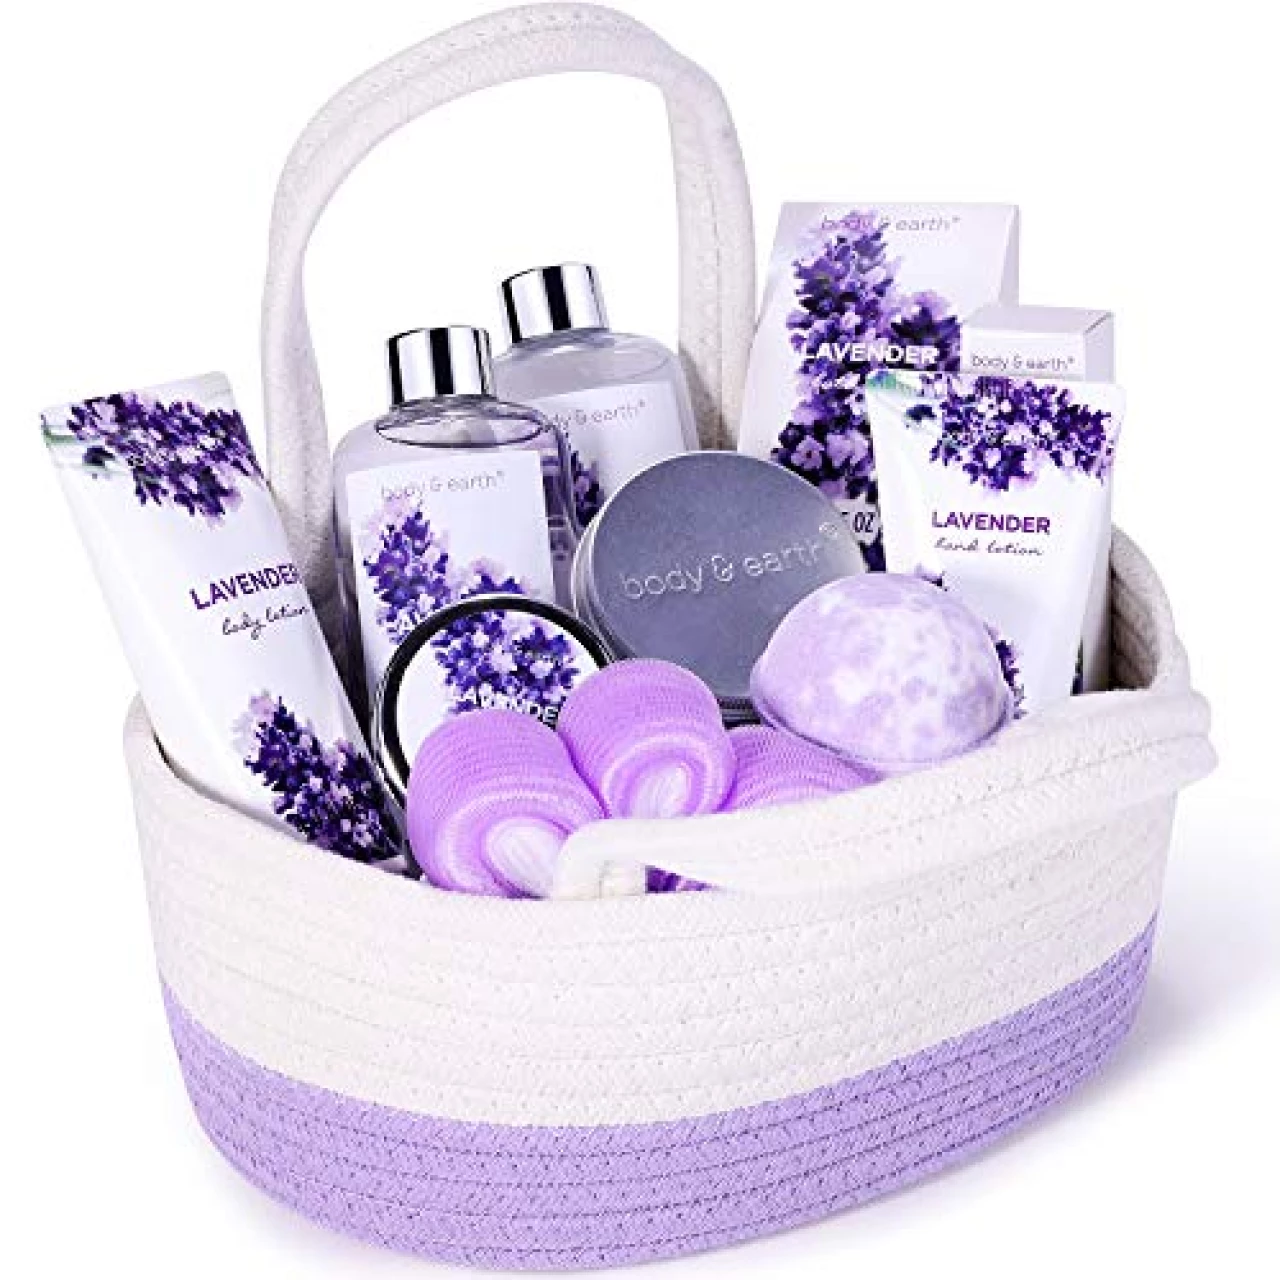 Gift Basket for Women - Bath Gift Set for Women, Body &amp; Earth Gift Baskets with Essential Oil, Shower Gel, Body Lotion, Lavender Gifts for Women, Spa Basket for Dad Mom, Christmas Gifts for Her